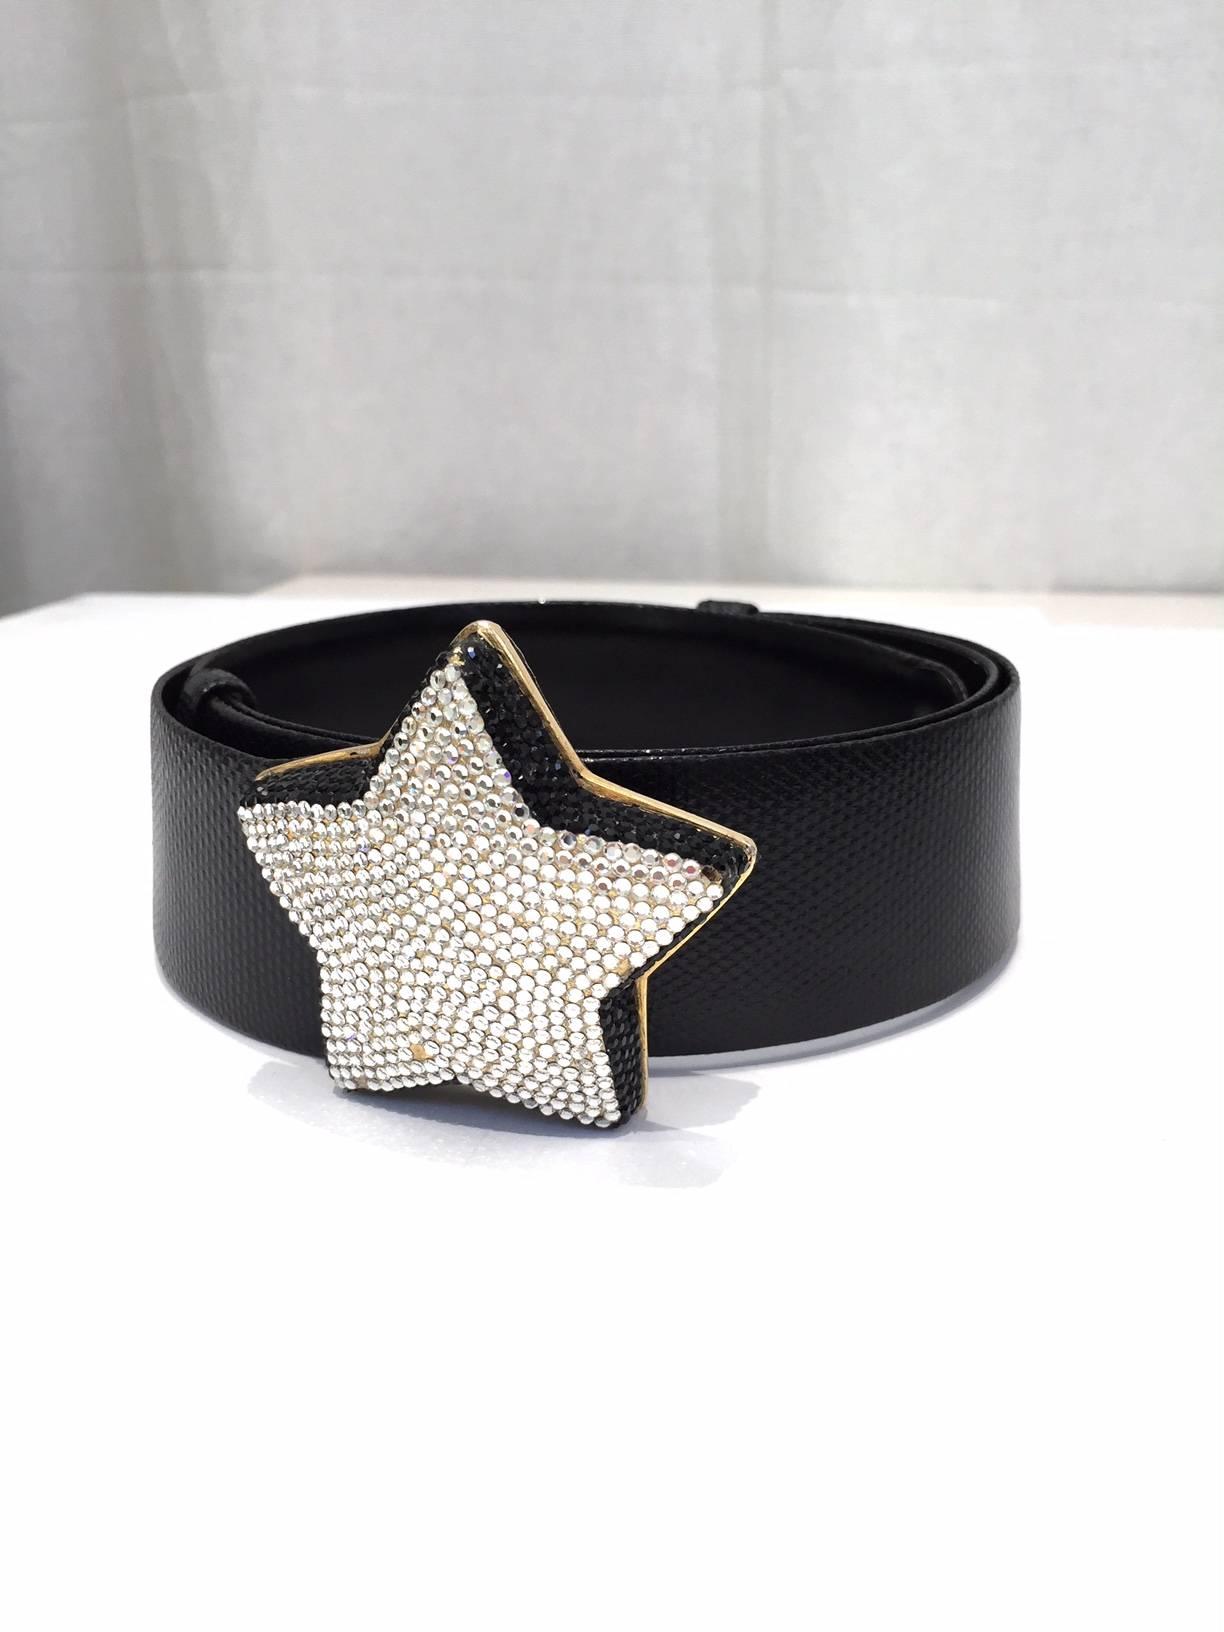 Vintage Judith Leiber black leather belt with silver star jeweled buckled. Belt is adjustable.
fit size 2 to 8 SMALL - MEDIUM
This Judith lieber Belt is styled with vintage Yves saint Laurent black and yellow rose print floral wrap cocktail summer